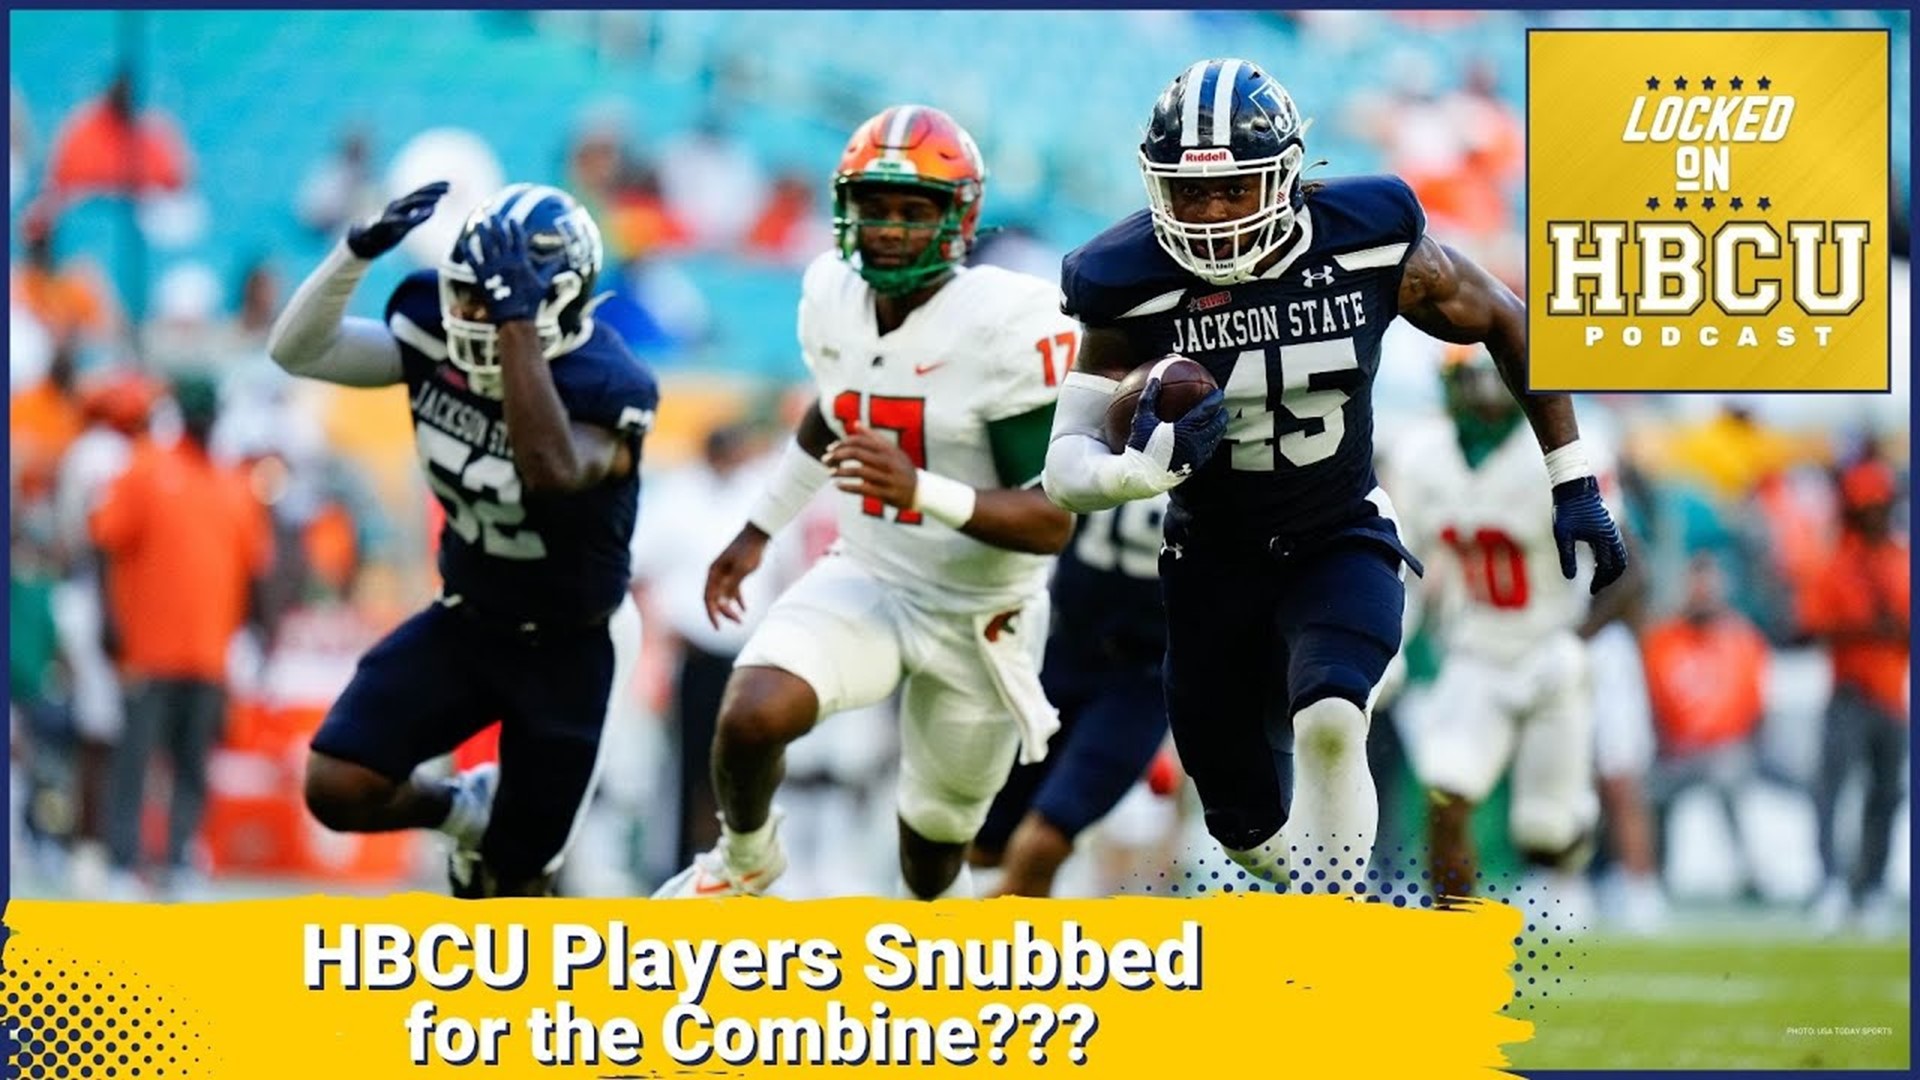 Isaiah Land and Mark Evans are the only HBCU players invited to the NFL Combine, and people are upset that other players like Aubrey Miller and Jadakis Bonds also di